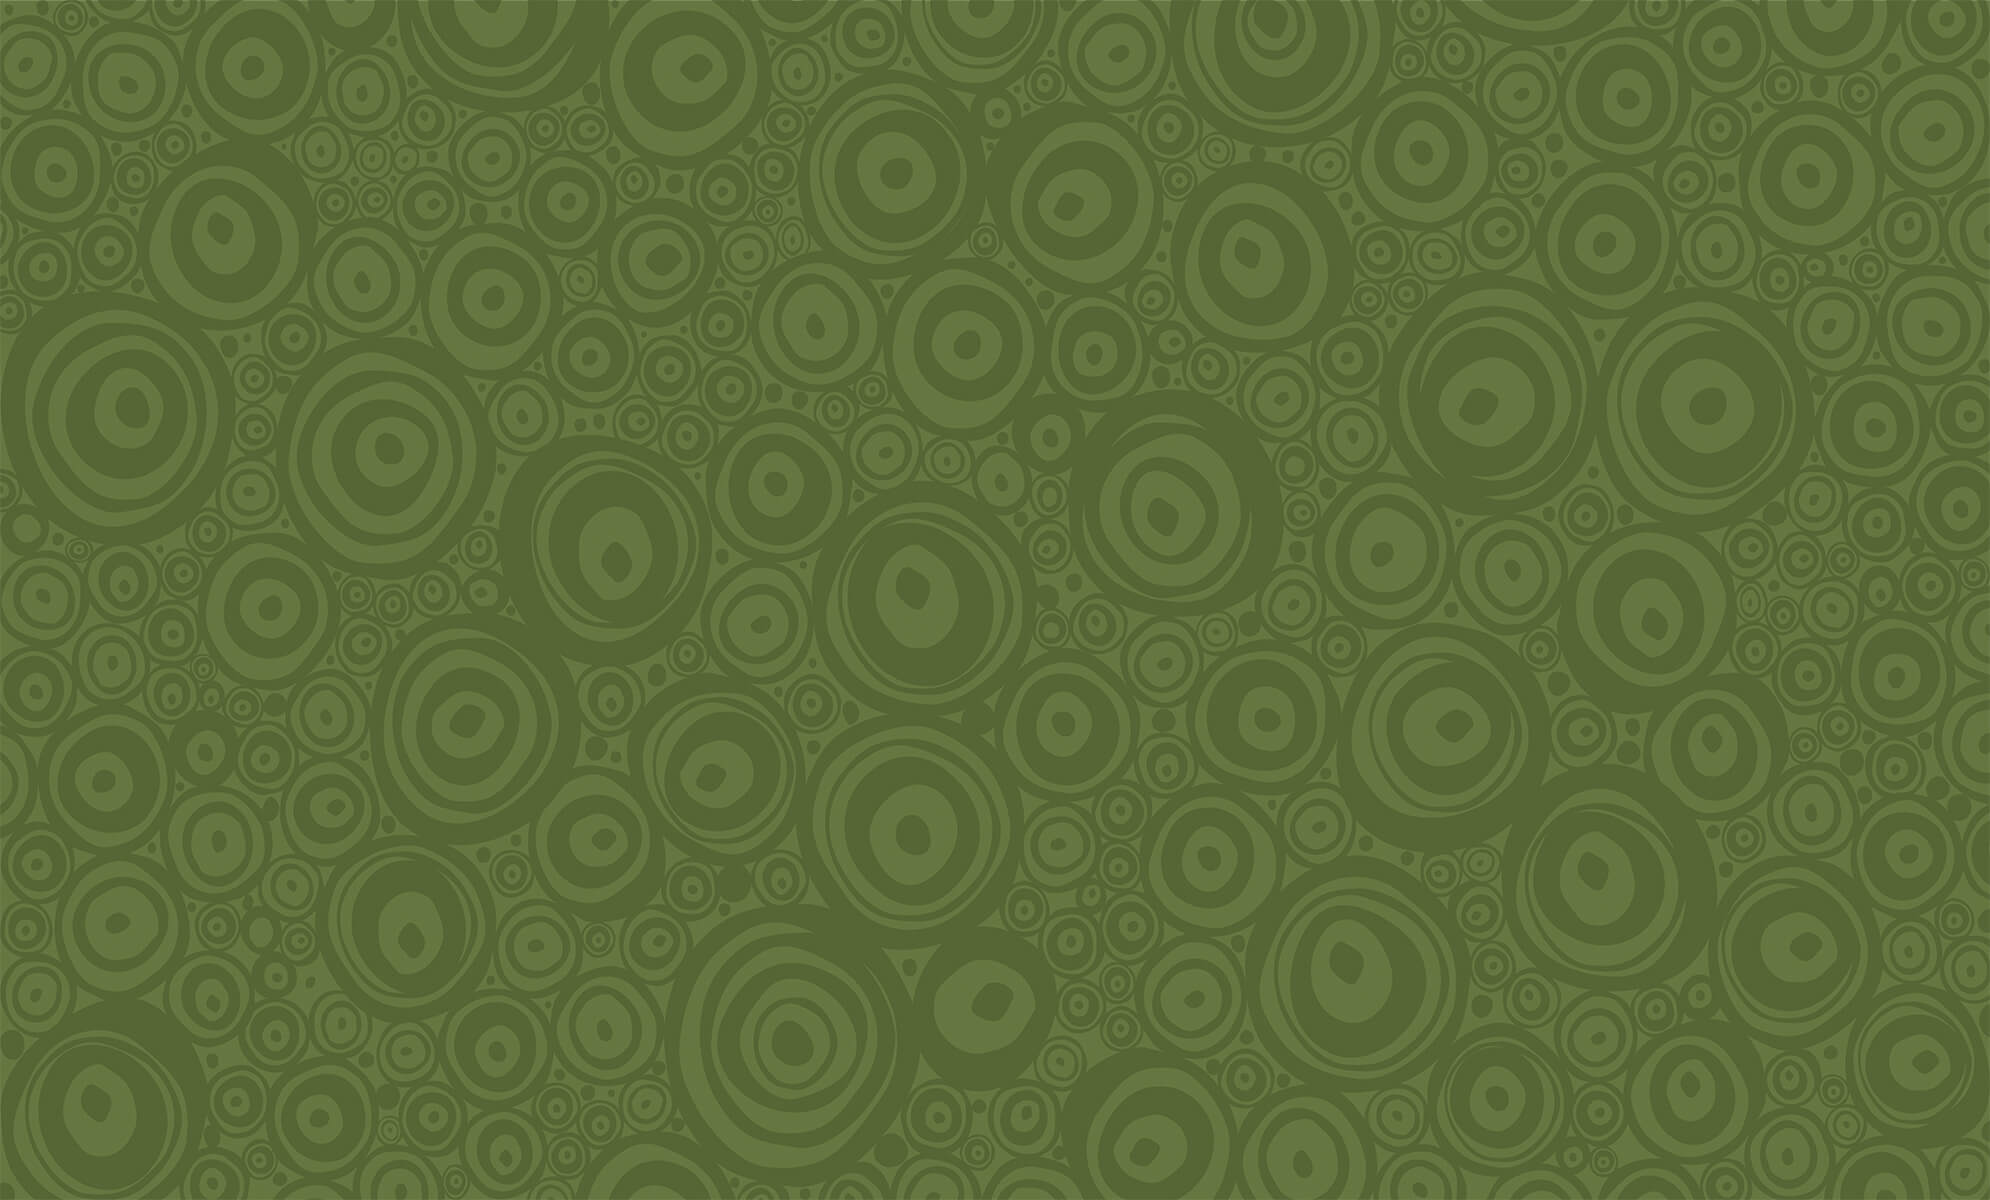 Background circles - army green